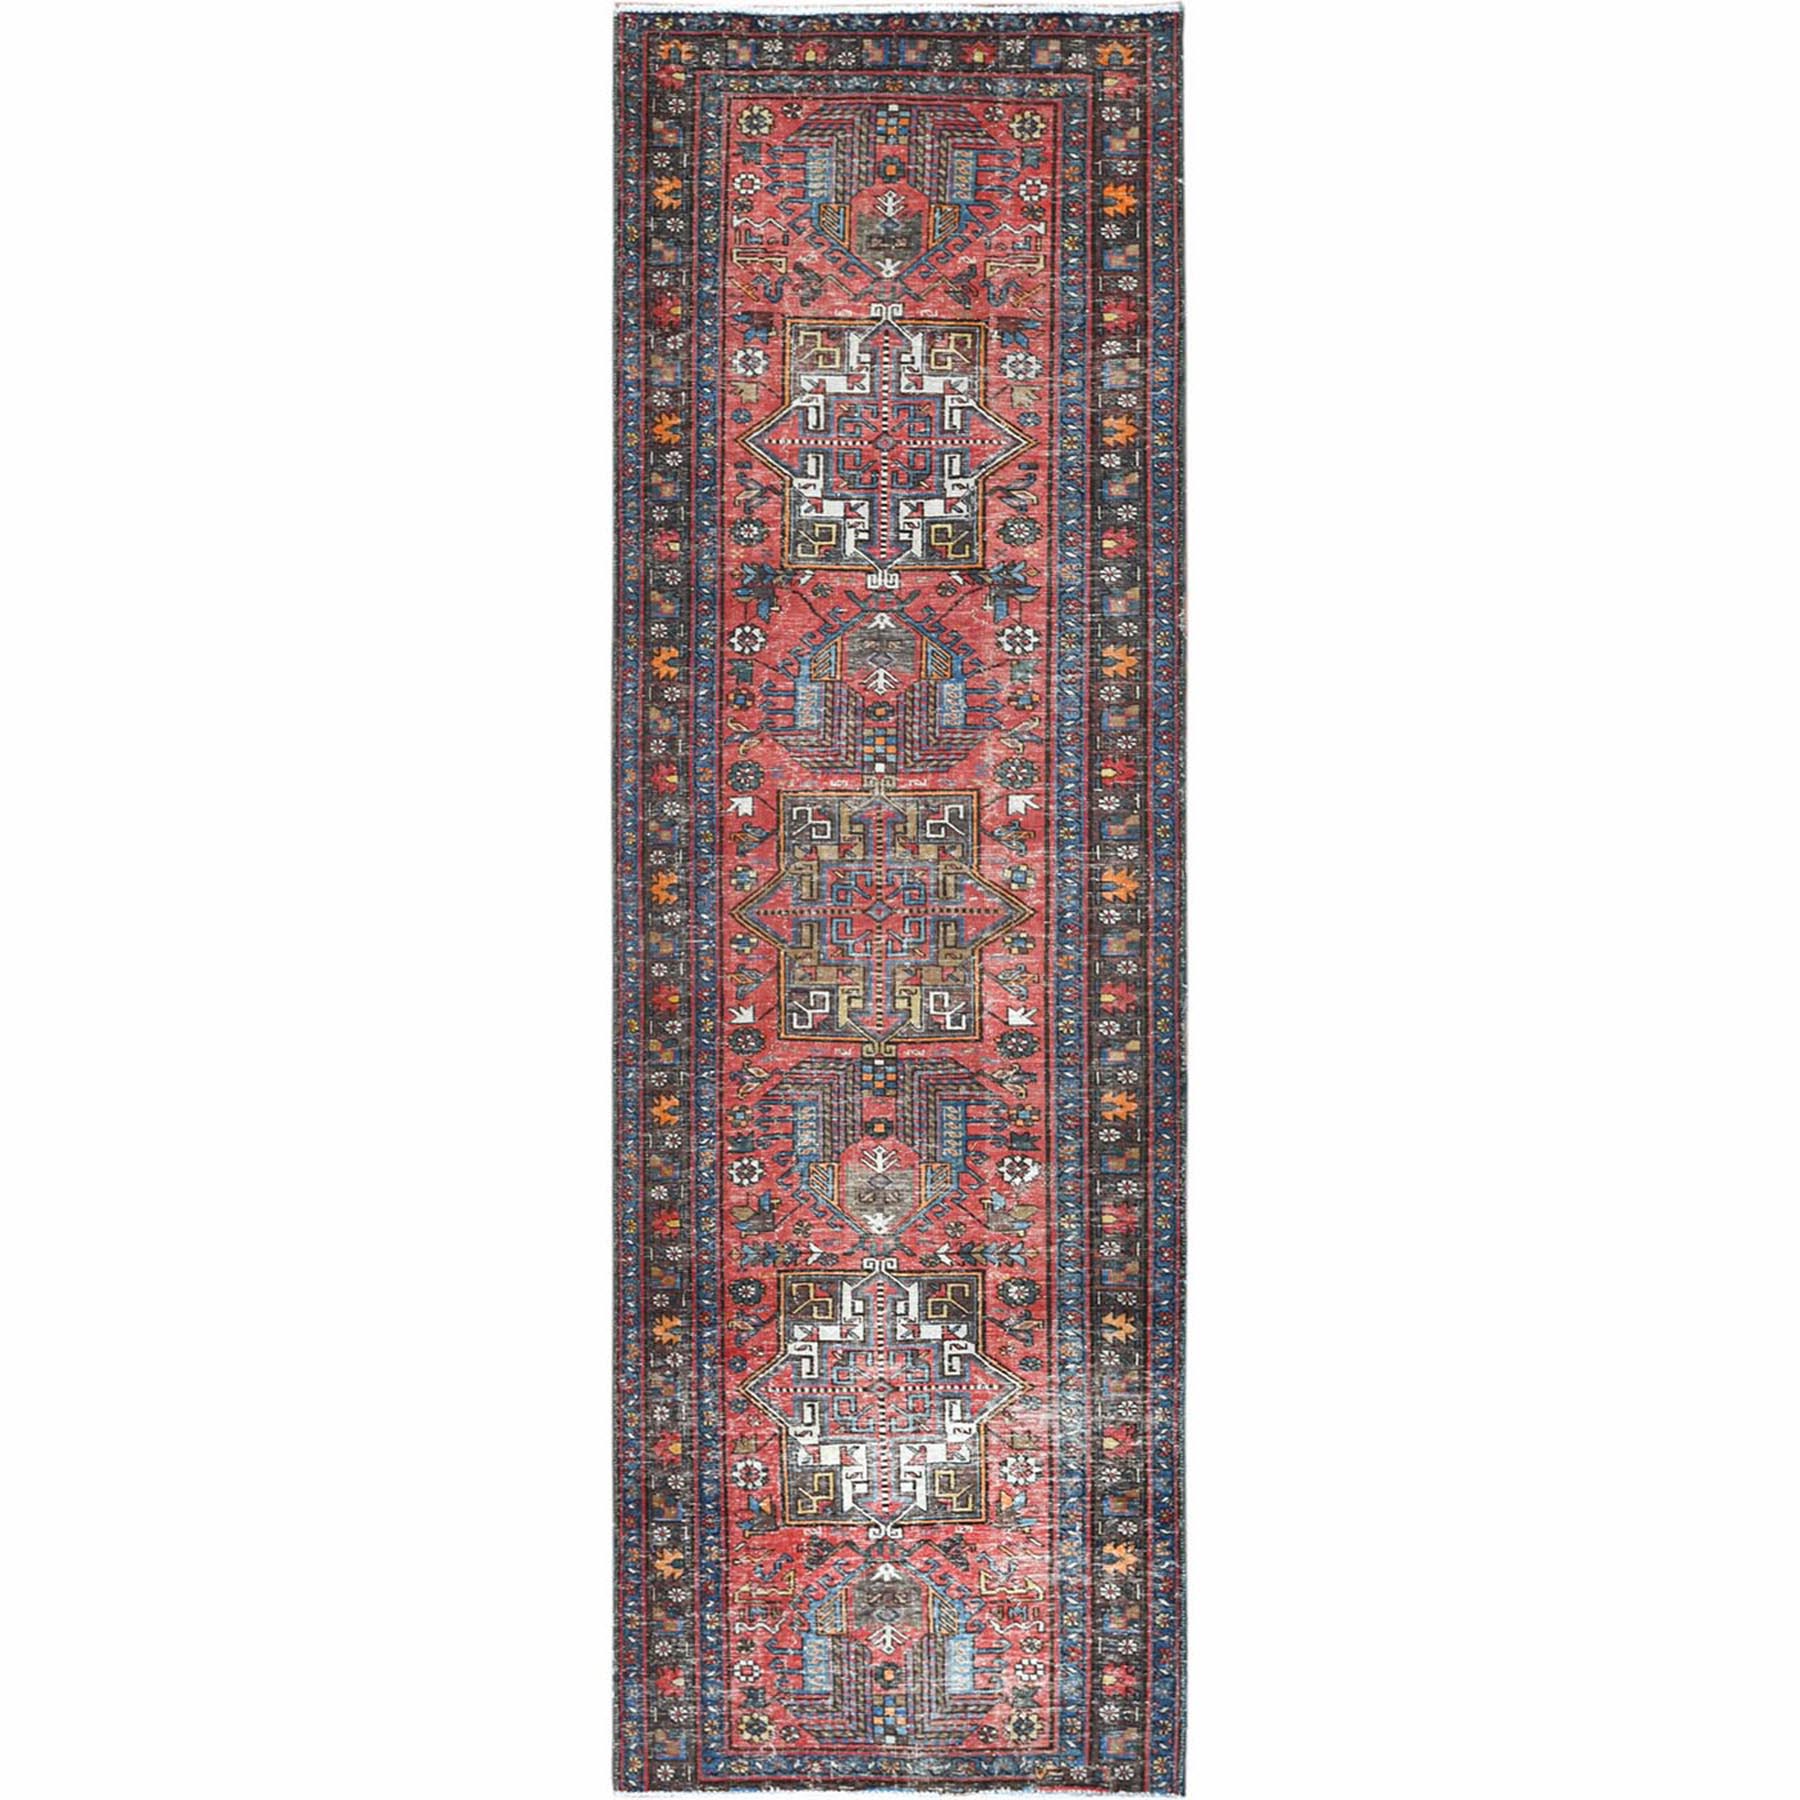 Fetneh Collection And Vintage Overdyed Collection Hand Knotted Red Rug No: 1121924